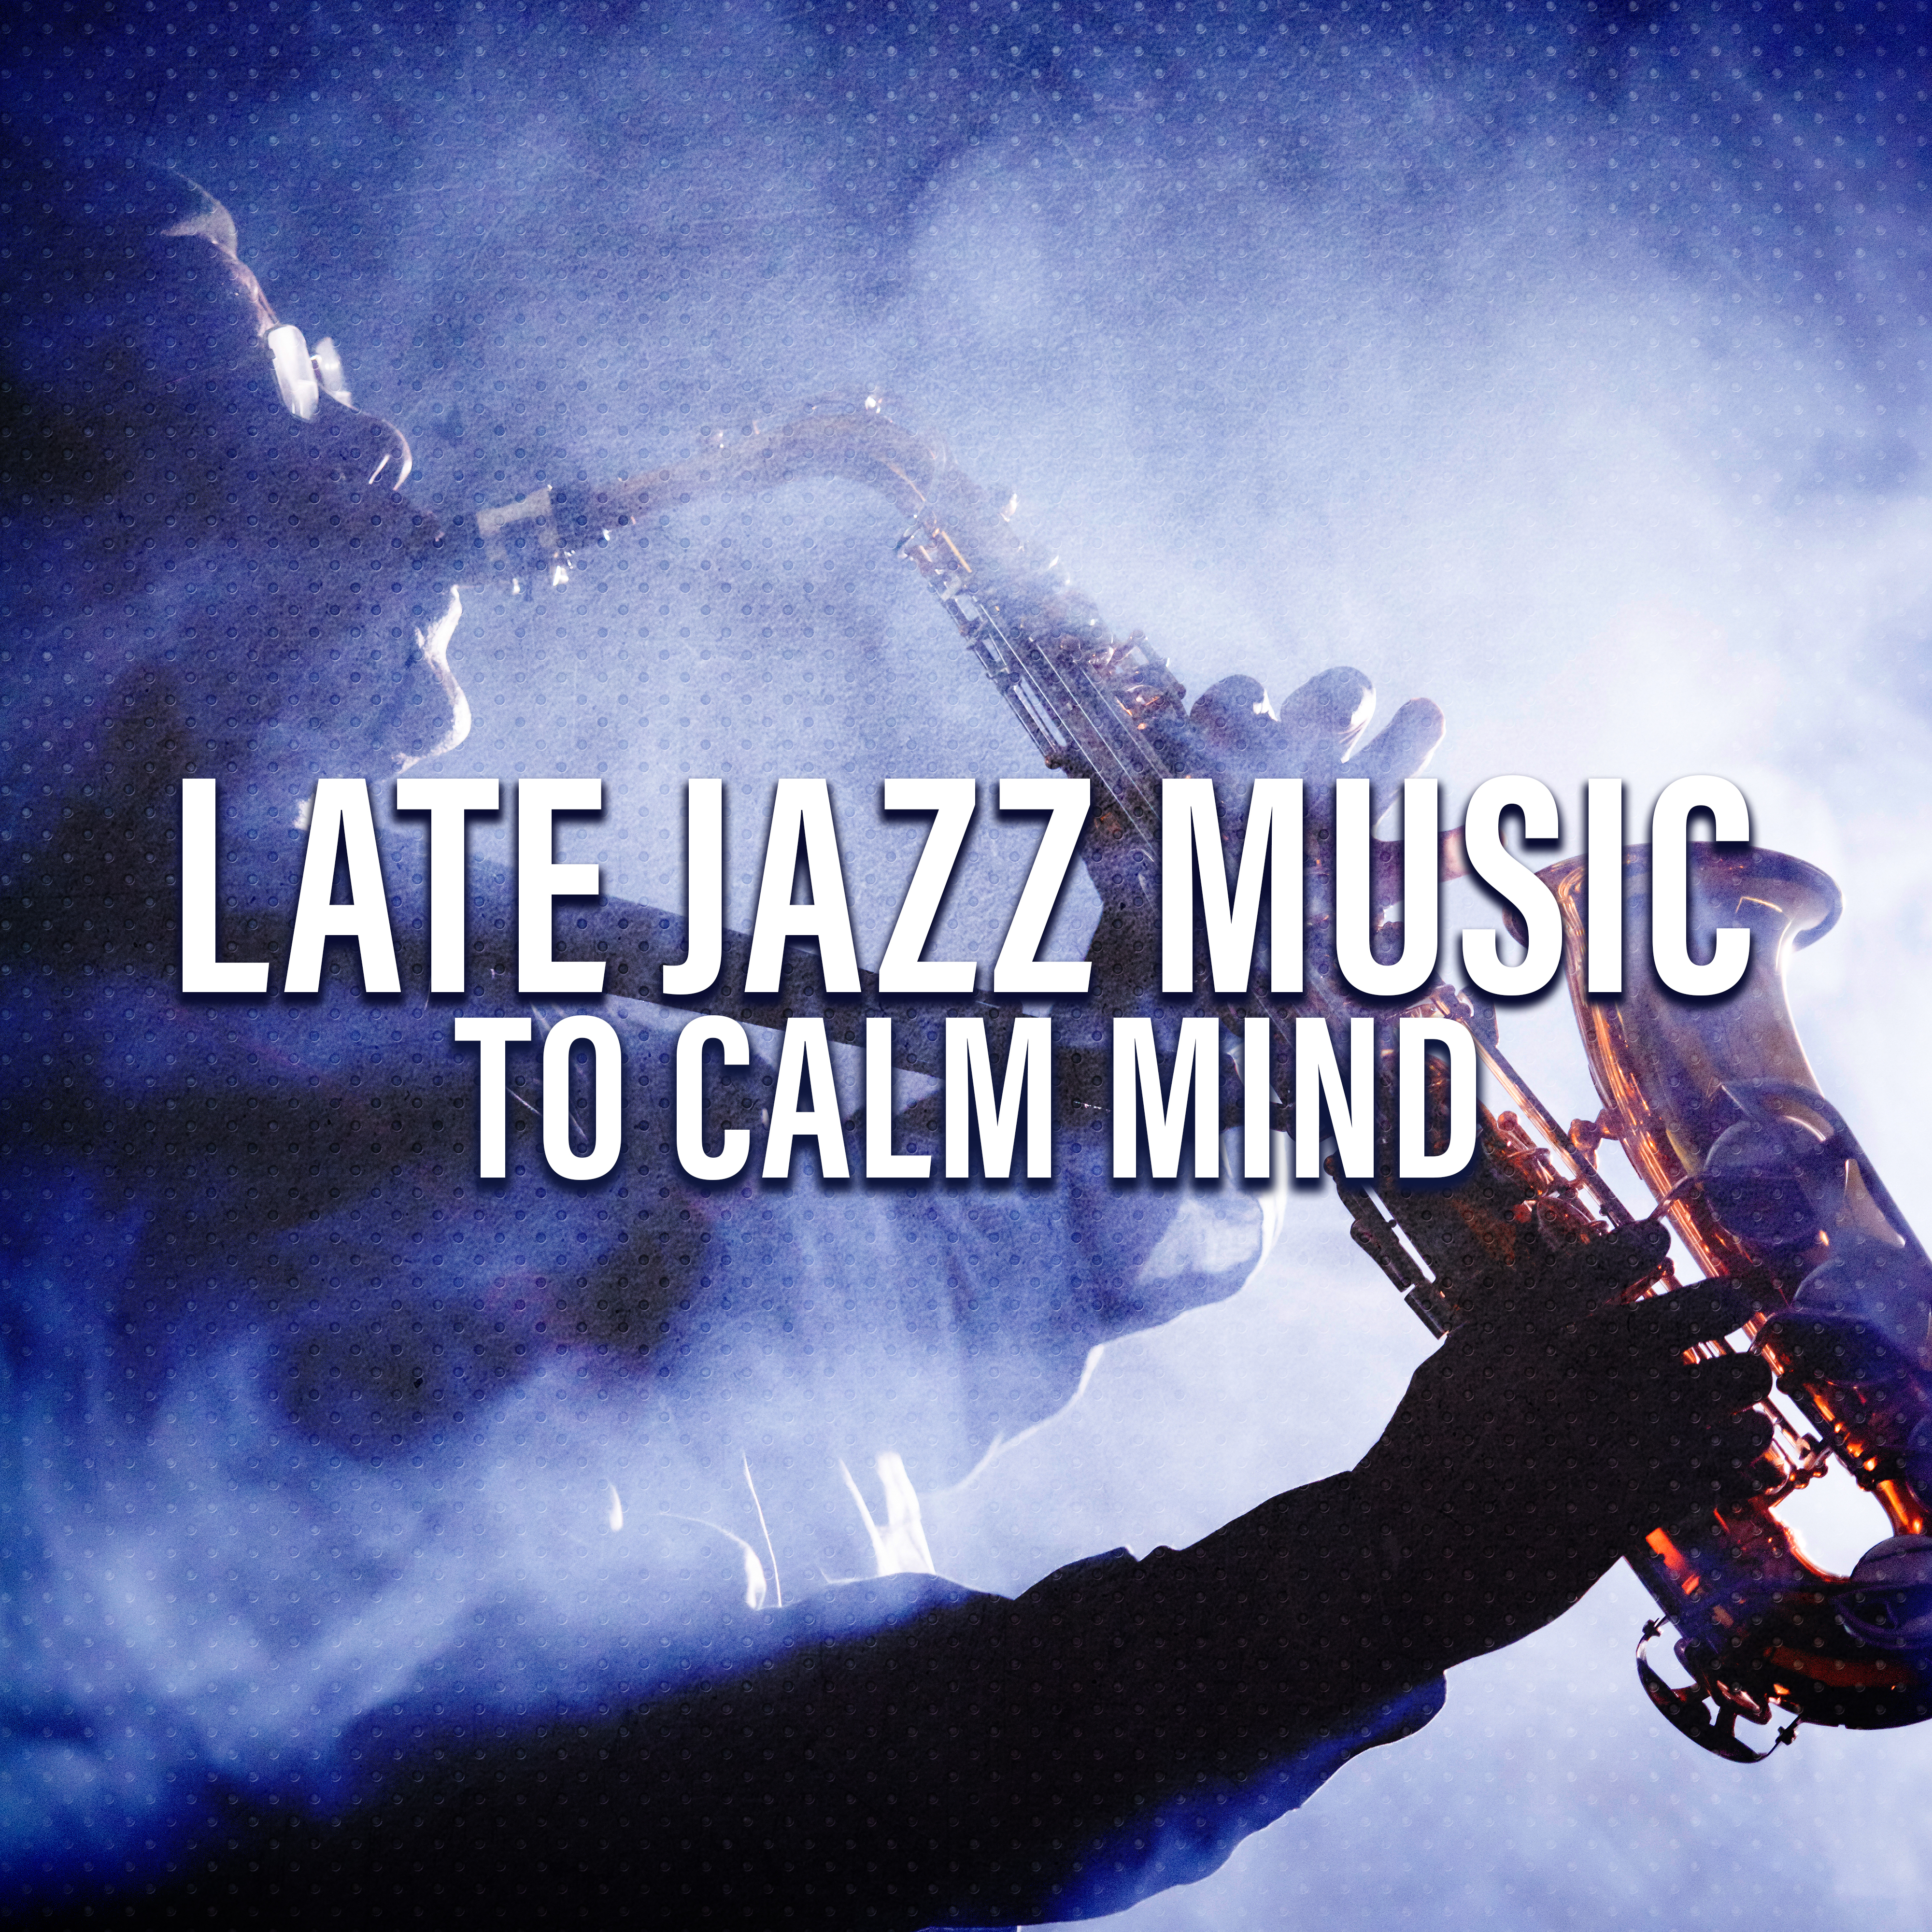 Late Jazz Music to Calm Mind